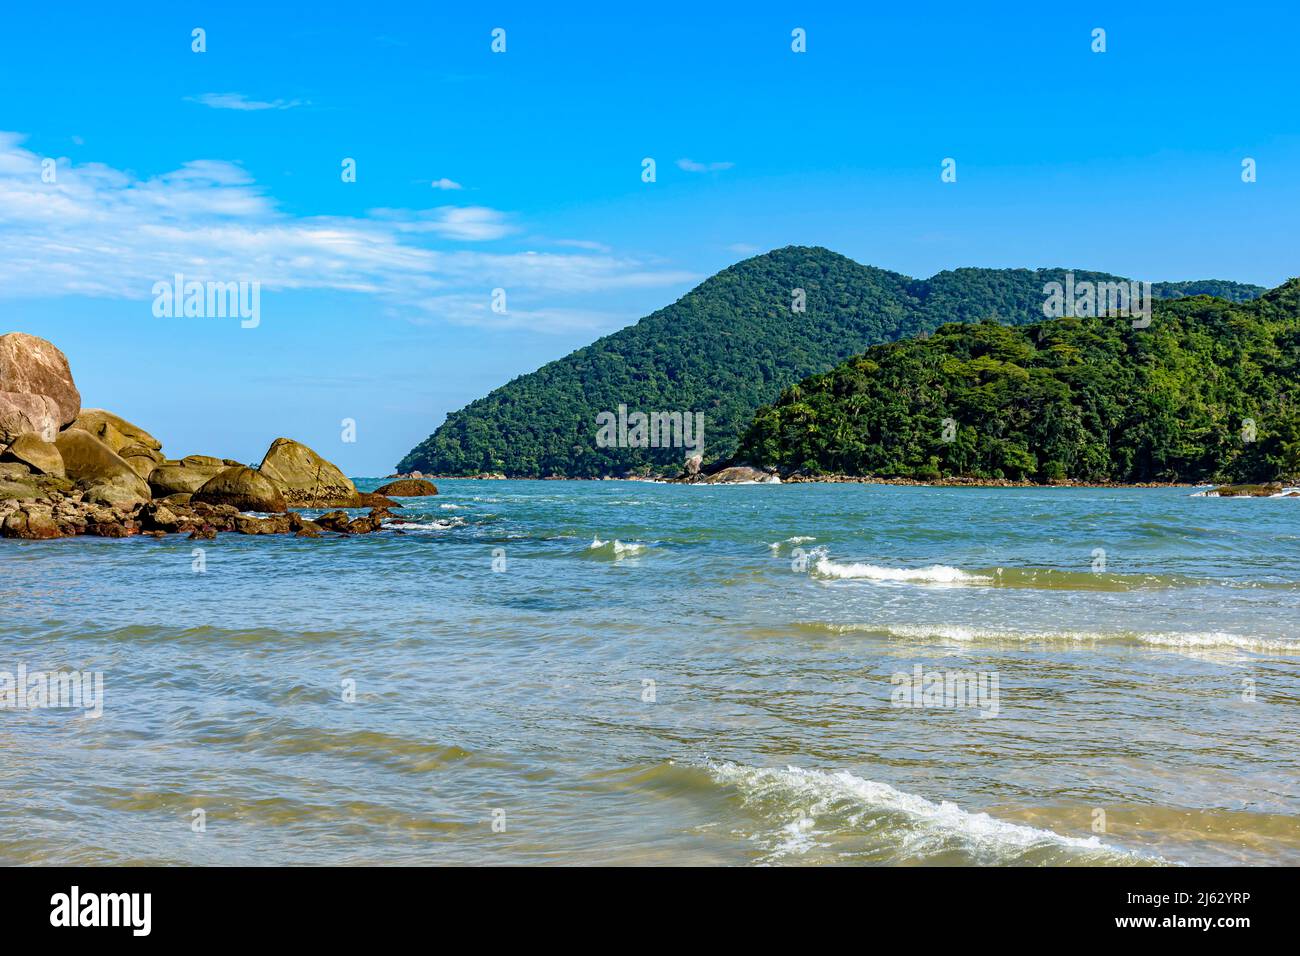 The sea with calm and transparent waters between the rocks, mountains and tropical forests of Bertioga on the coast of Sao Paulo, Brazil Stock Photo